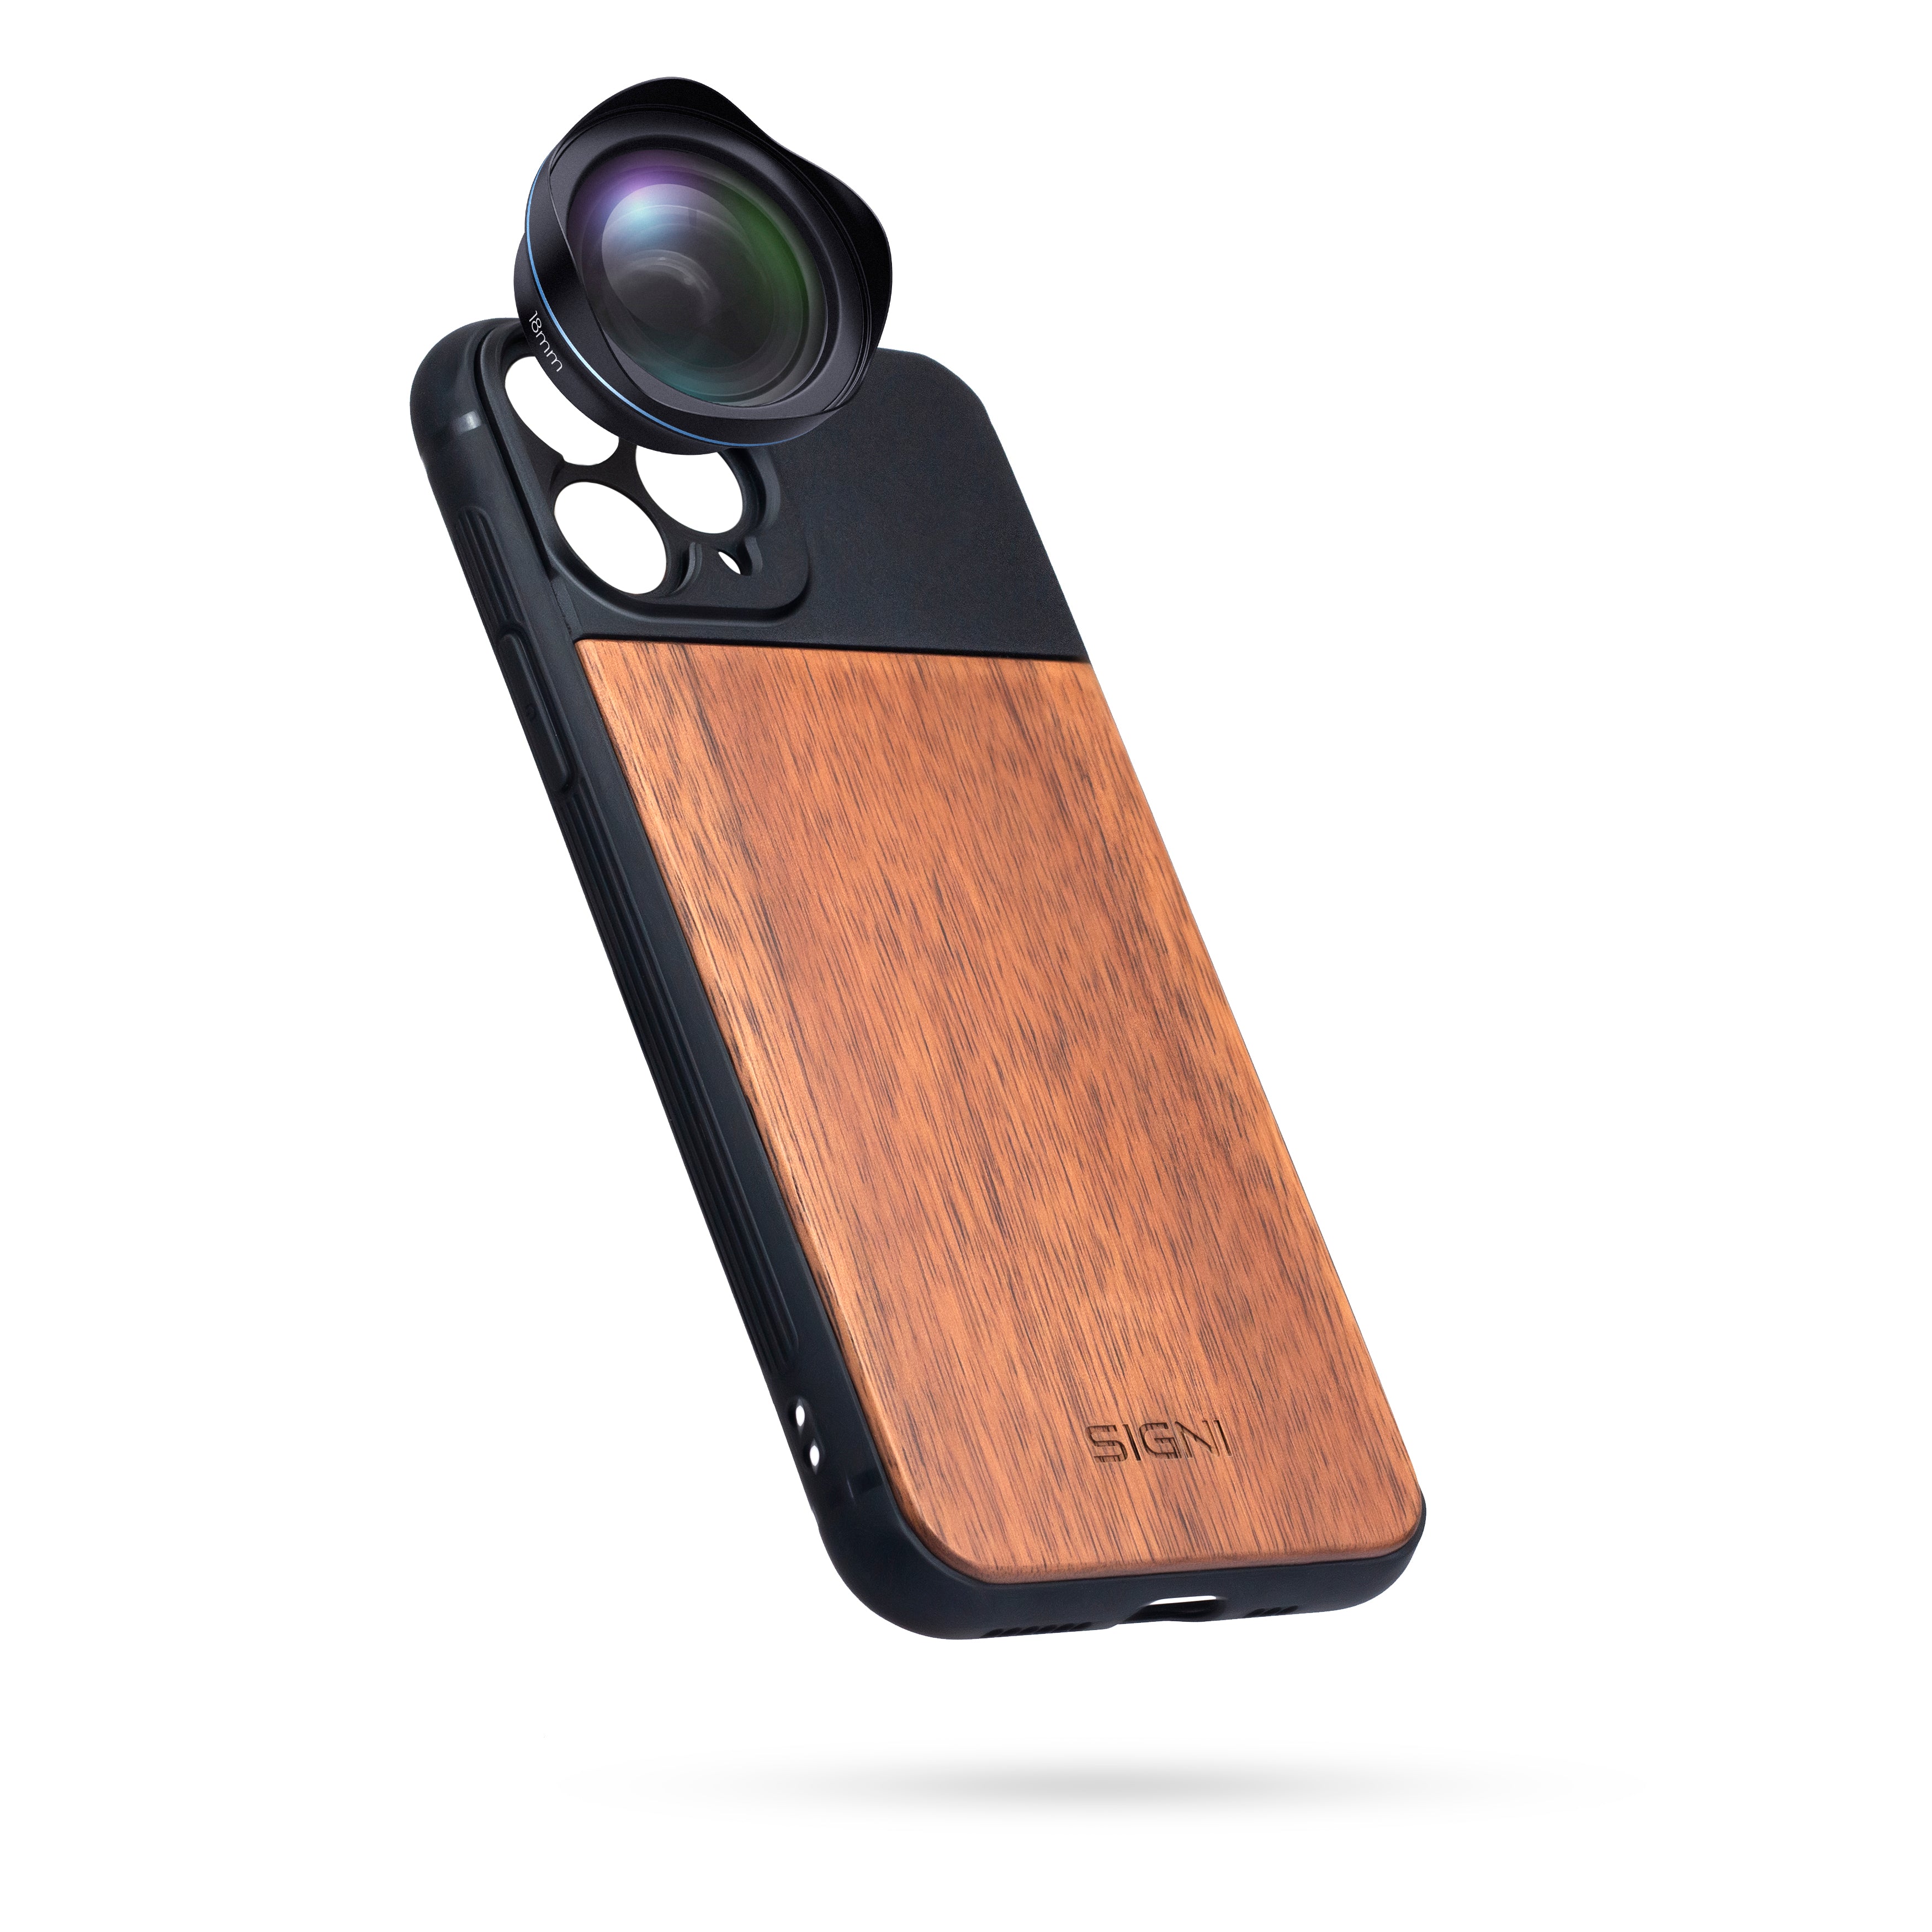 SKYVIK SIGNI One Wooden Mobile Lens case (iPhone 11 Pro)